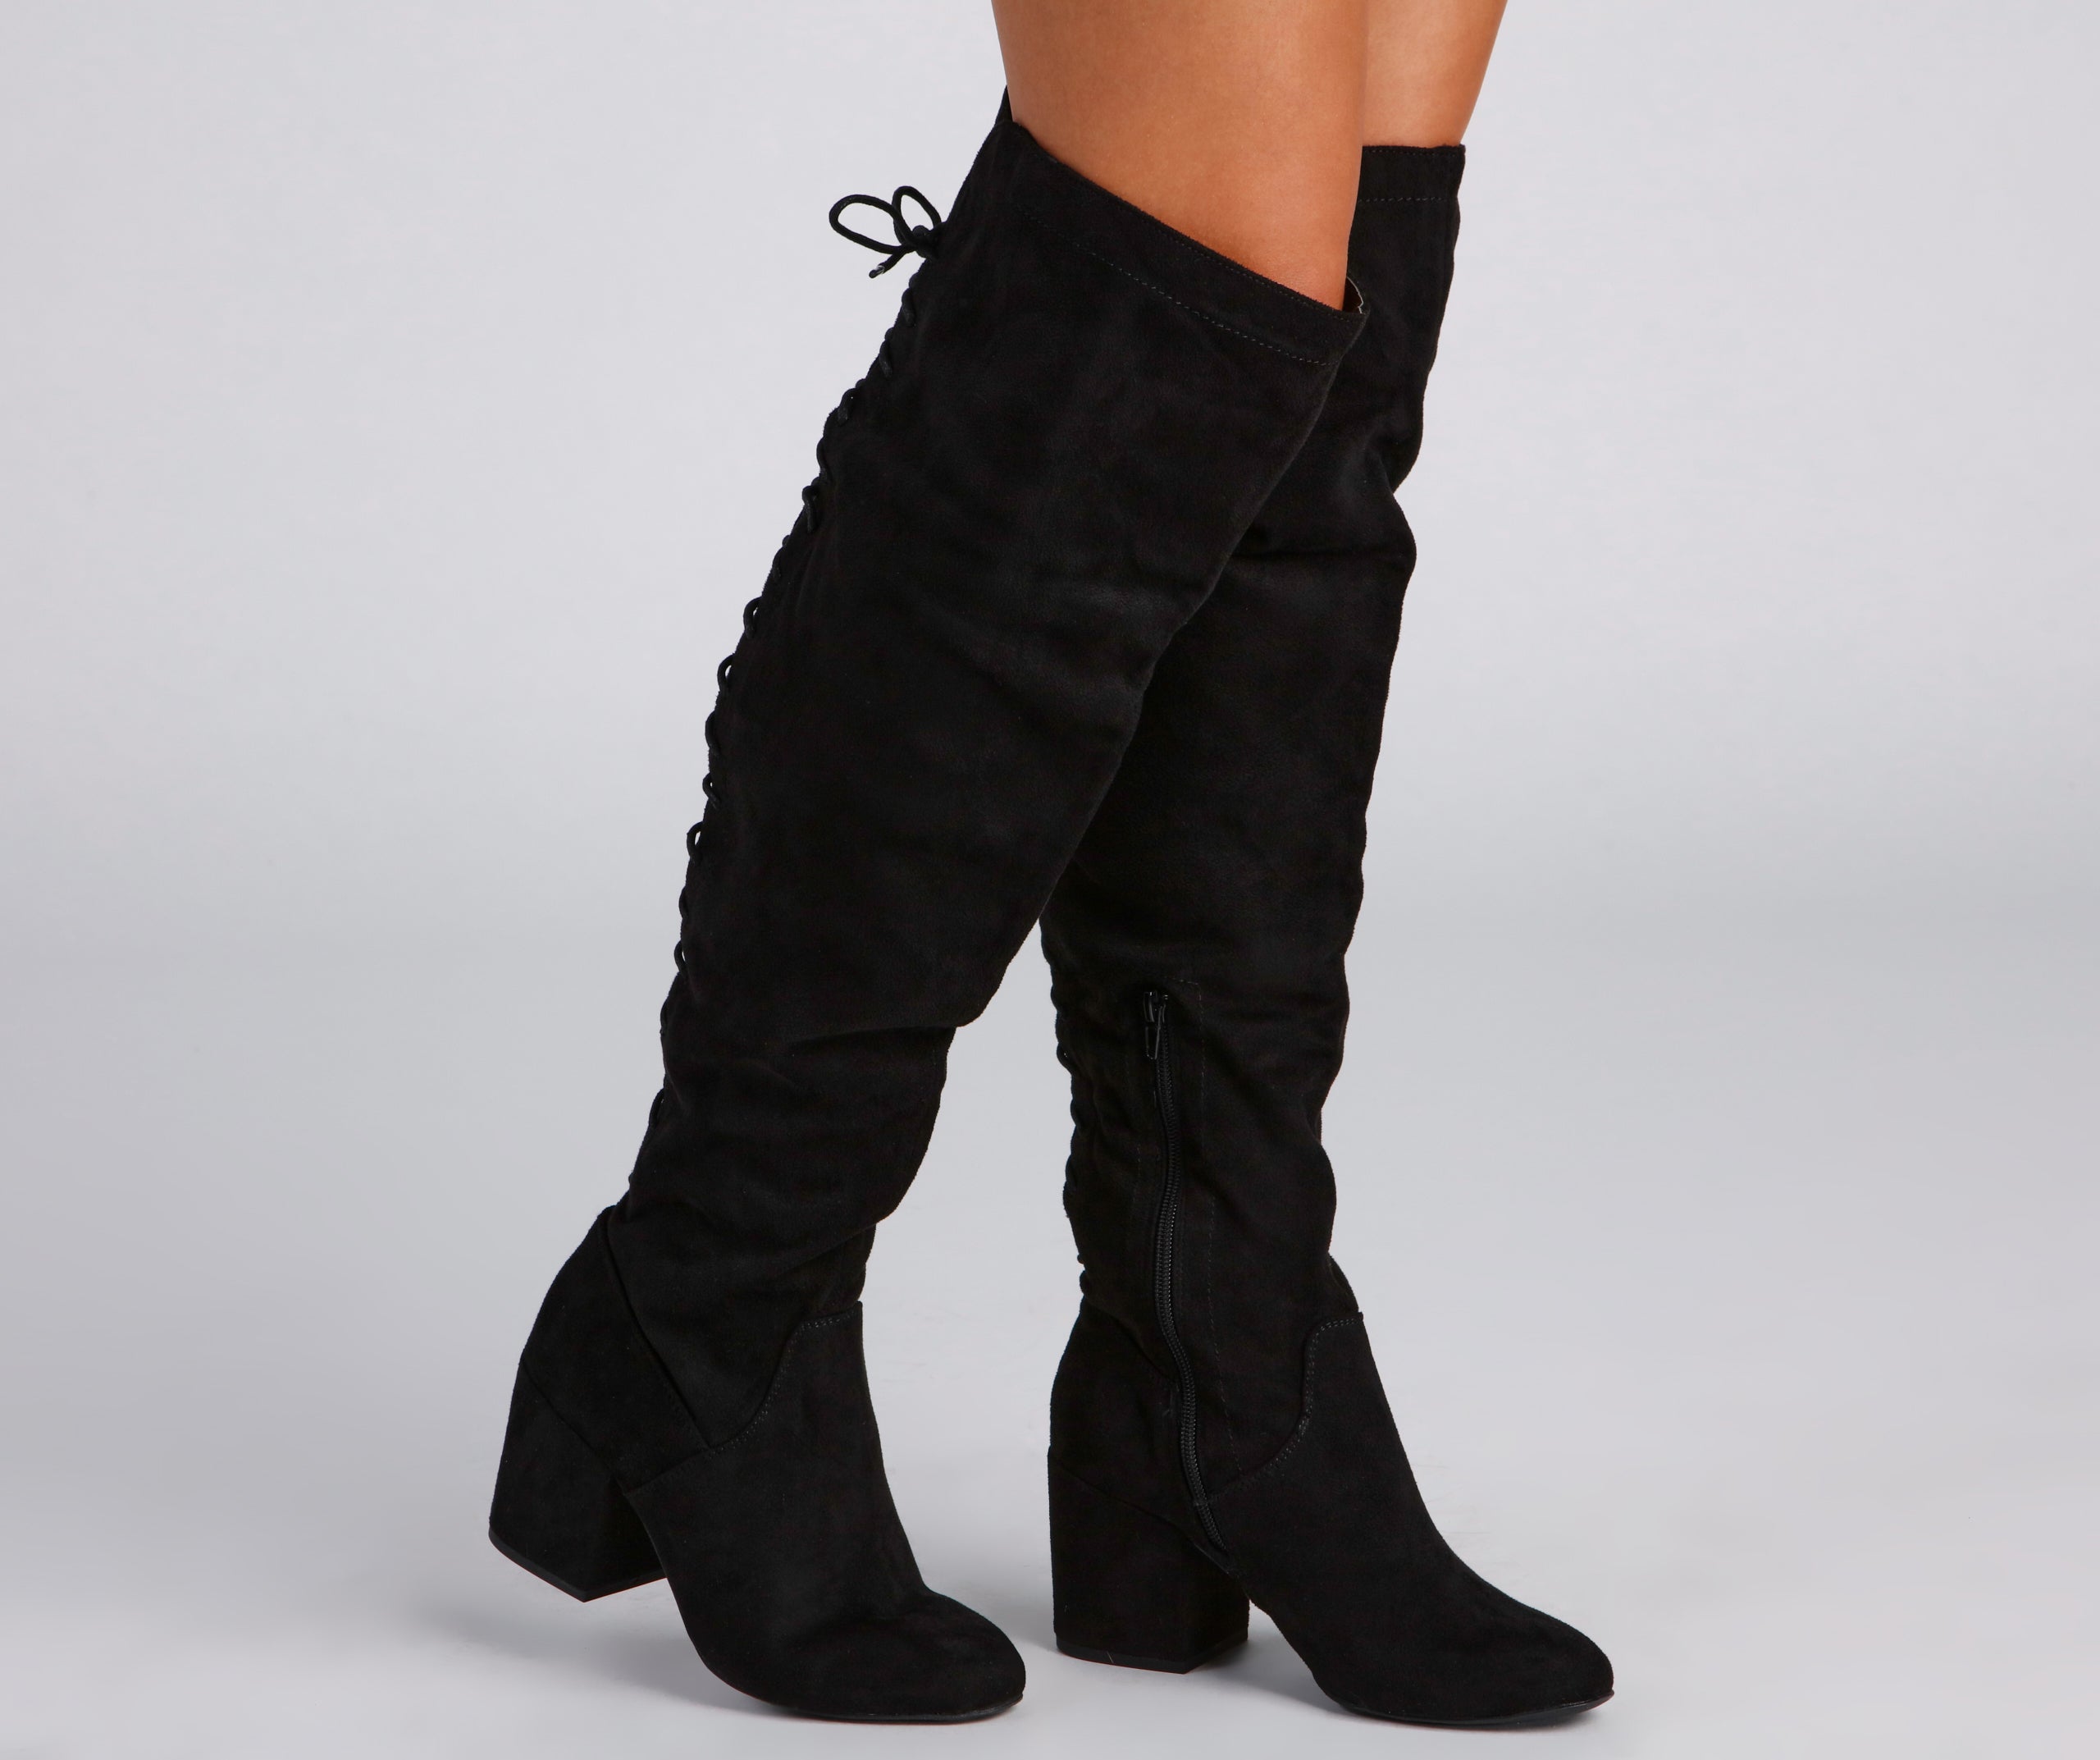 Chic Trends Lace-Up Boots Newgew